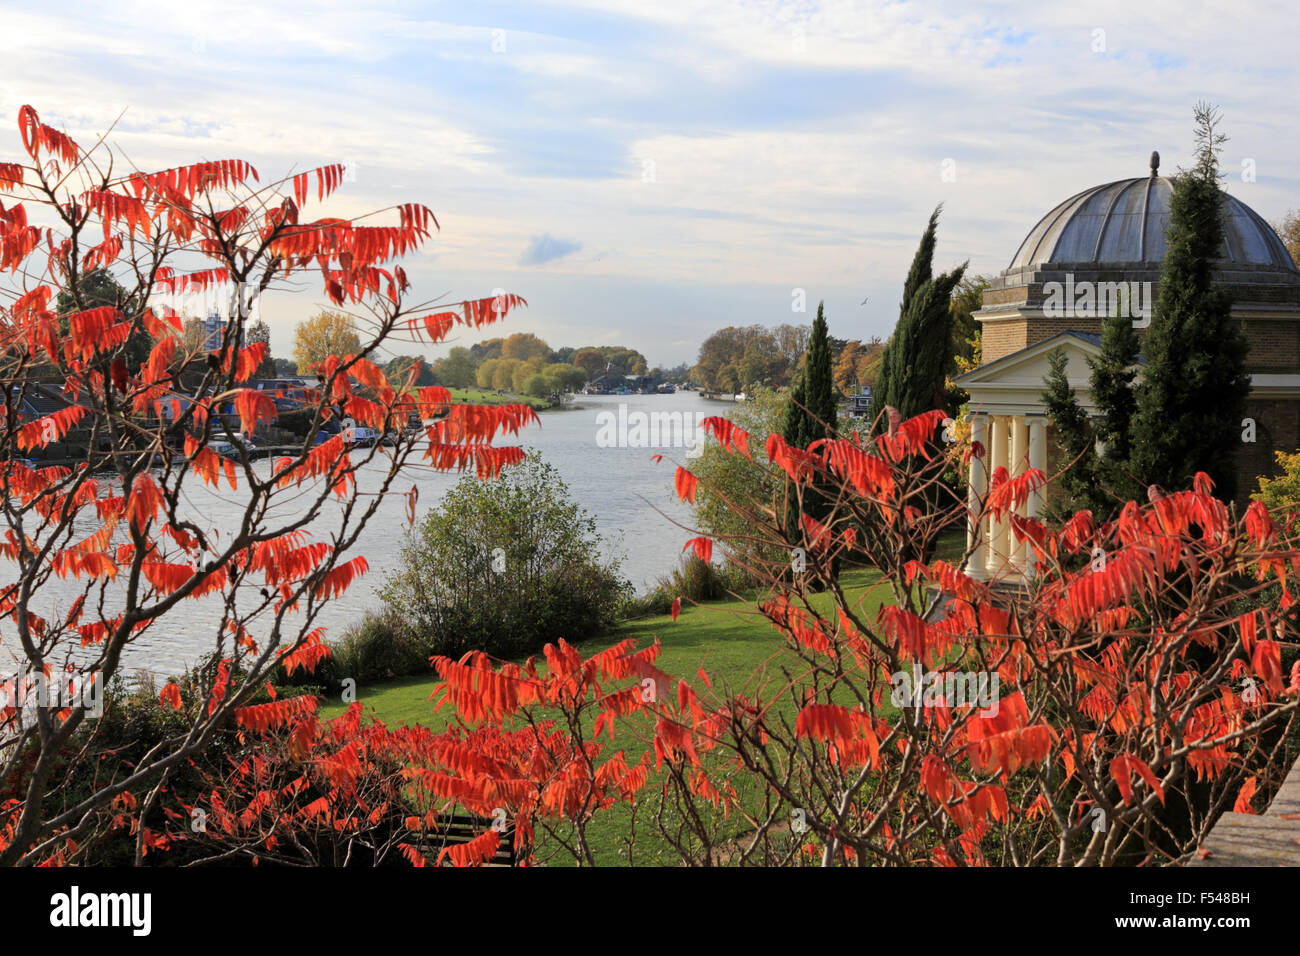 Hampton, Surrey, UK. 27th October 2015. The vivid red glow of schumach leaves in front of the Garrick Temple, on the River Thames at Hampton. Credit:  Julia Gavin UK/Alamy Live News Stock Photo